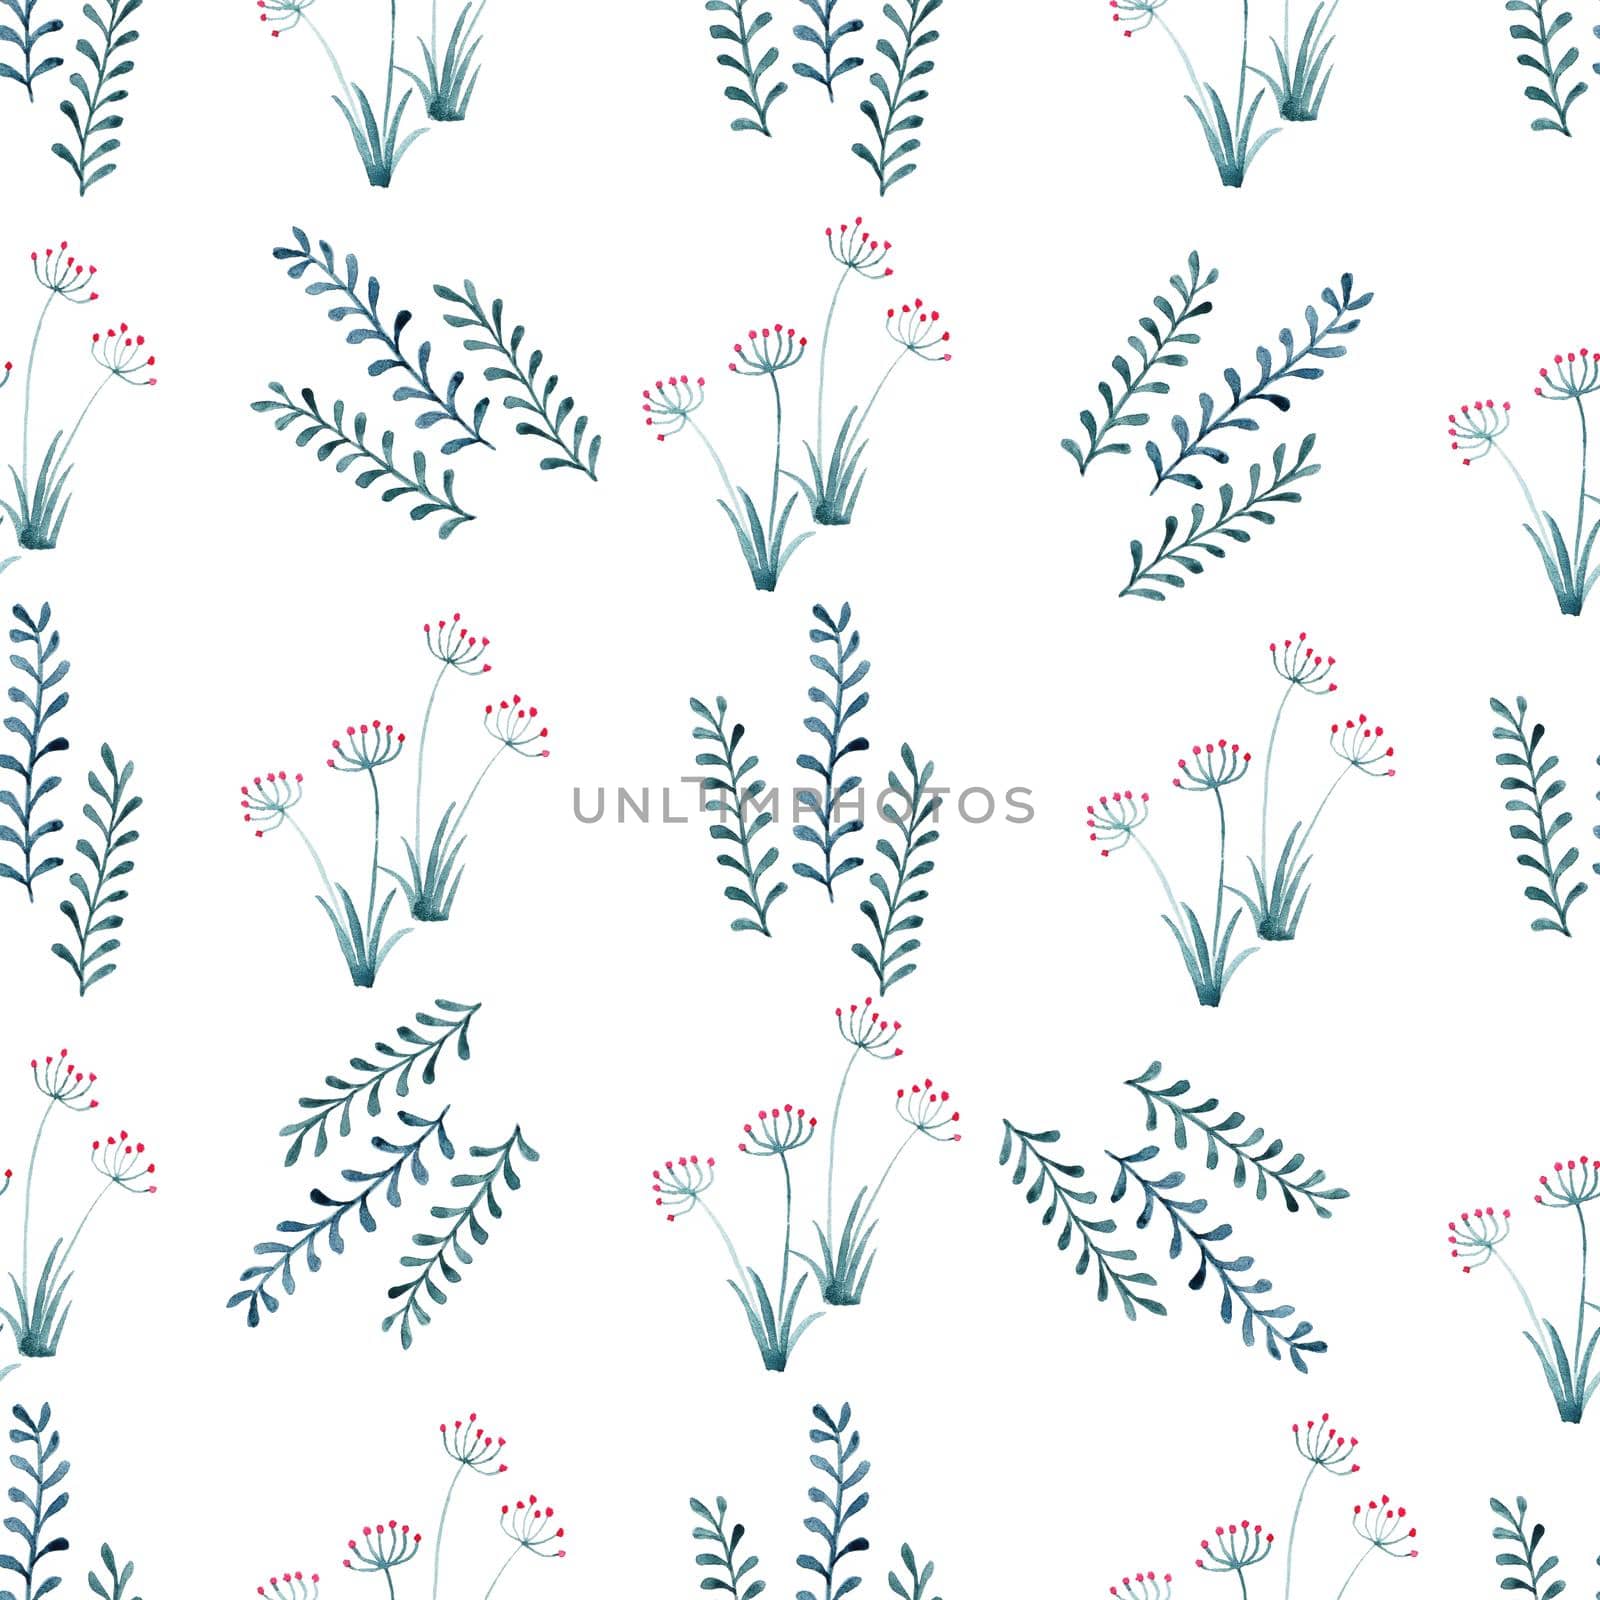 Watercolor seamless pattern with green hand painted leaves and herbs. Textile, wallpaper surface pattern design. High quality photo